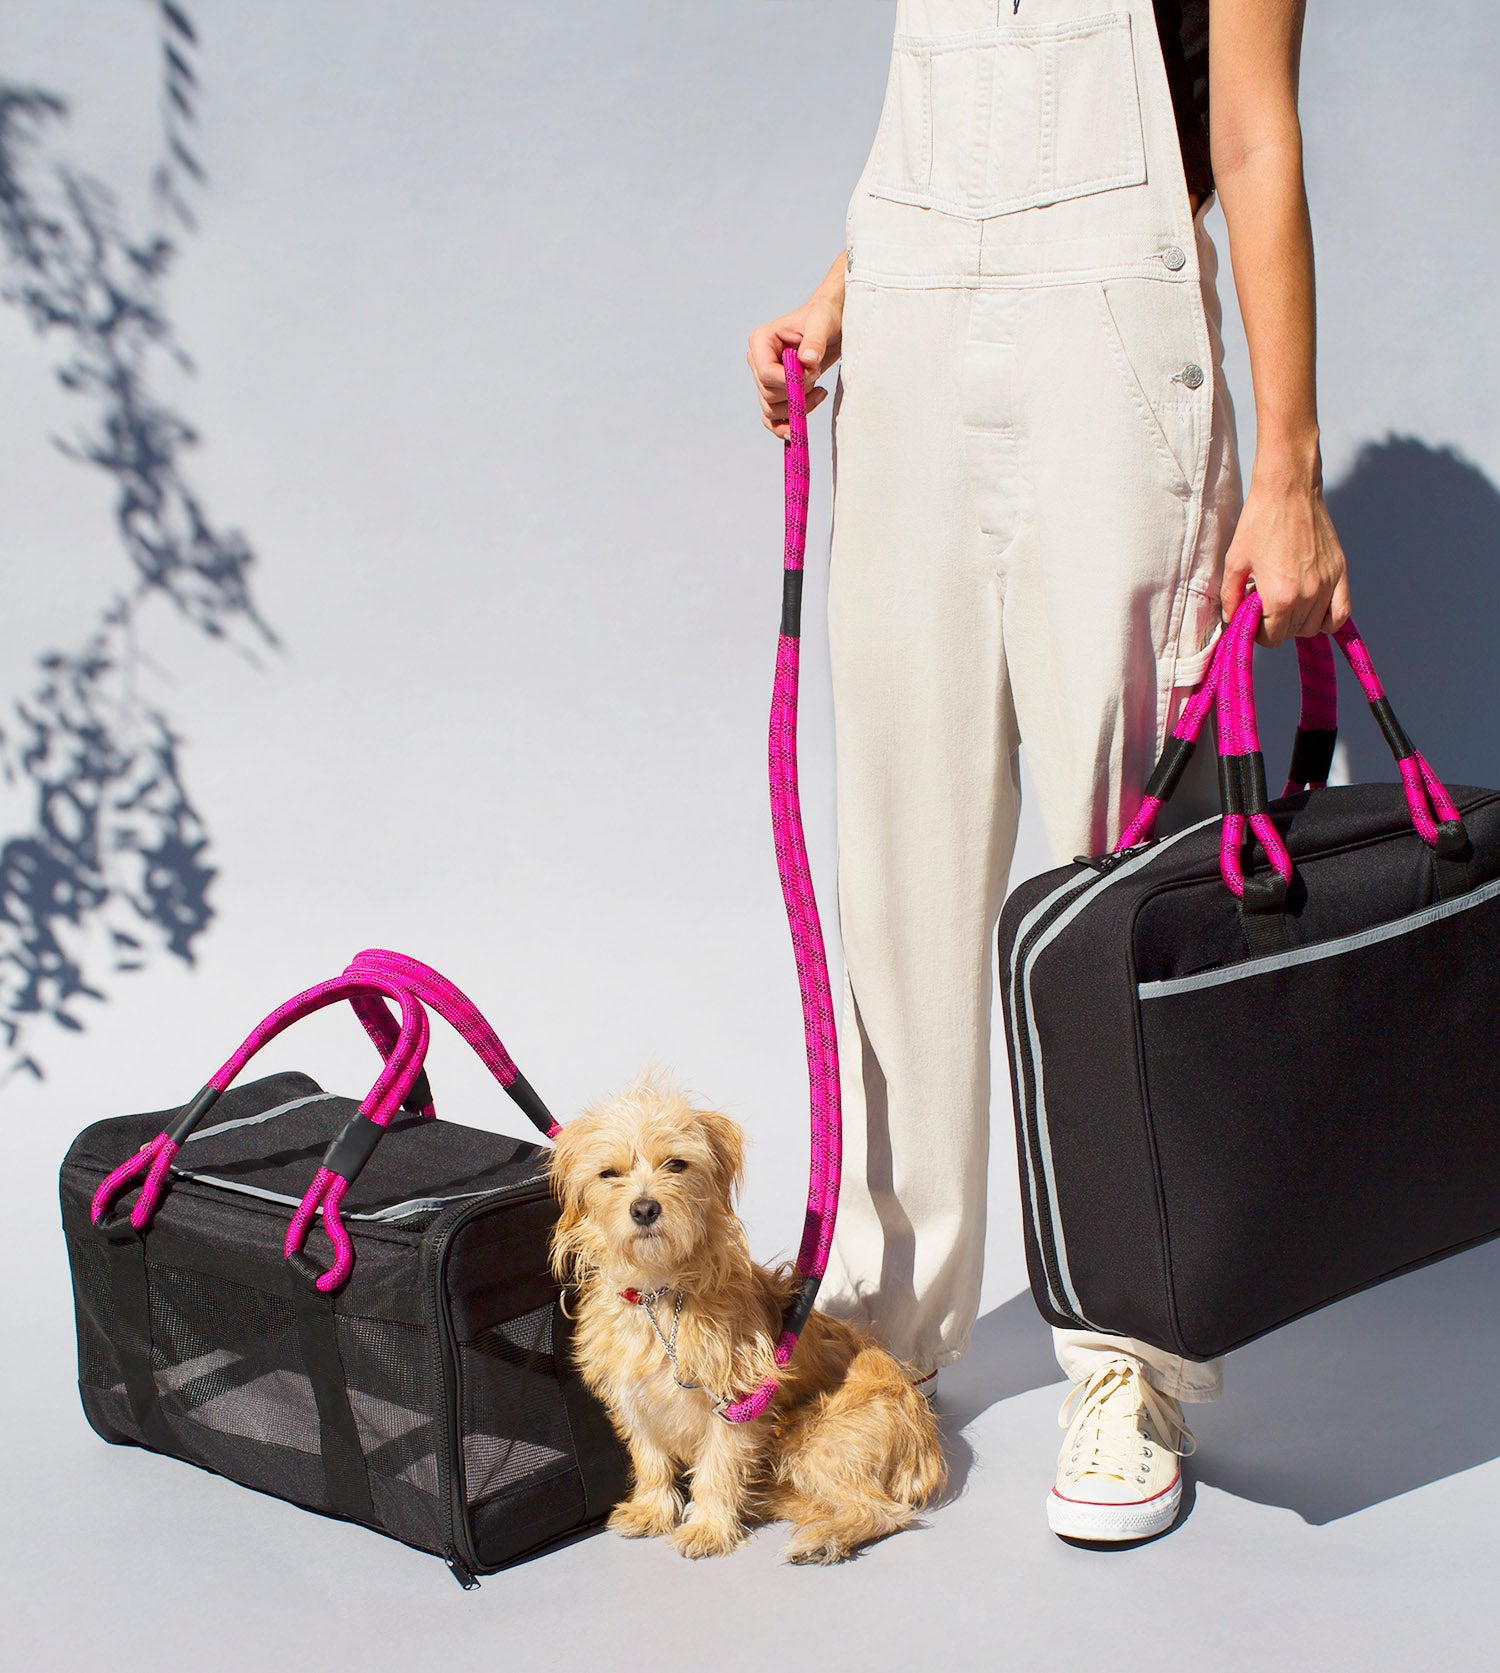 DIY - How to Make: Louis Vuitton inspired Luggage with Pet Carrier 